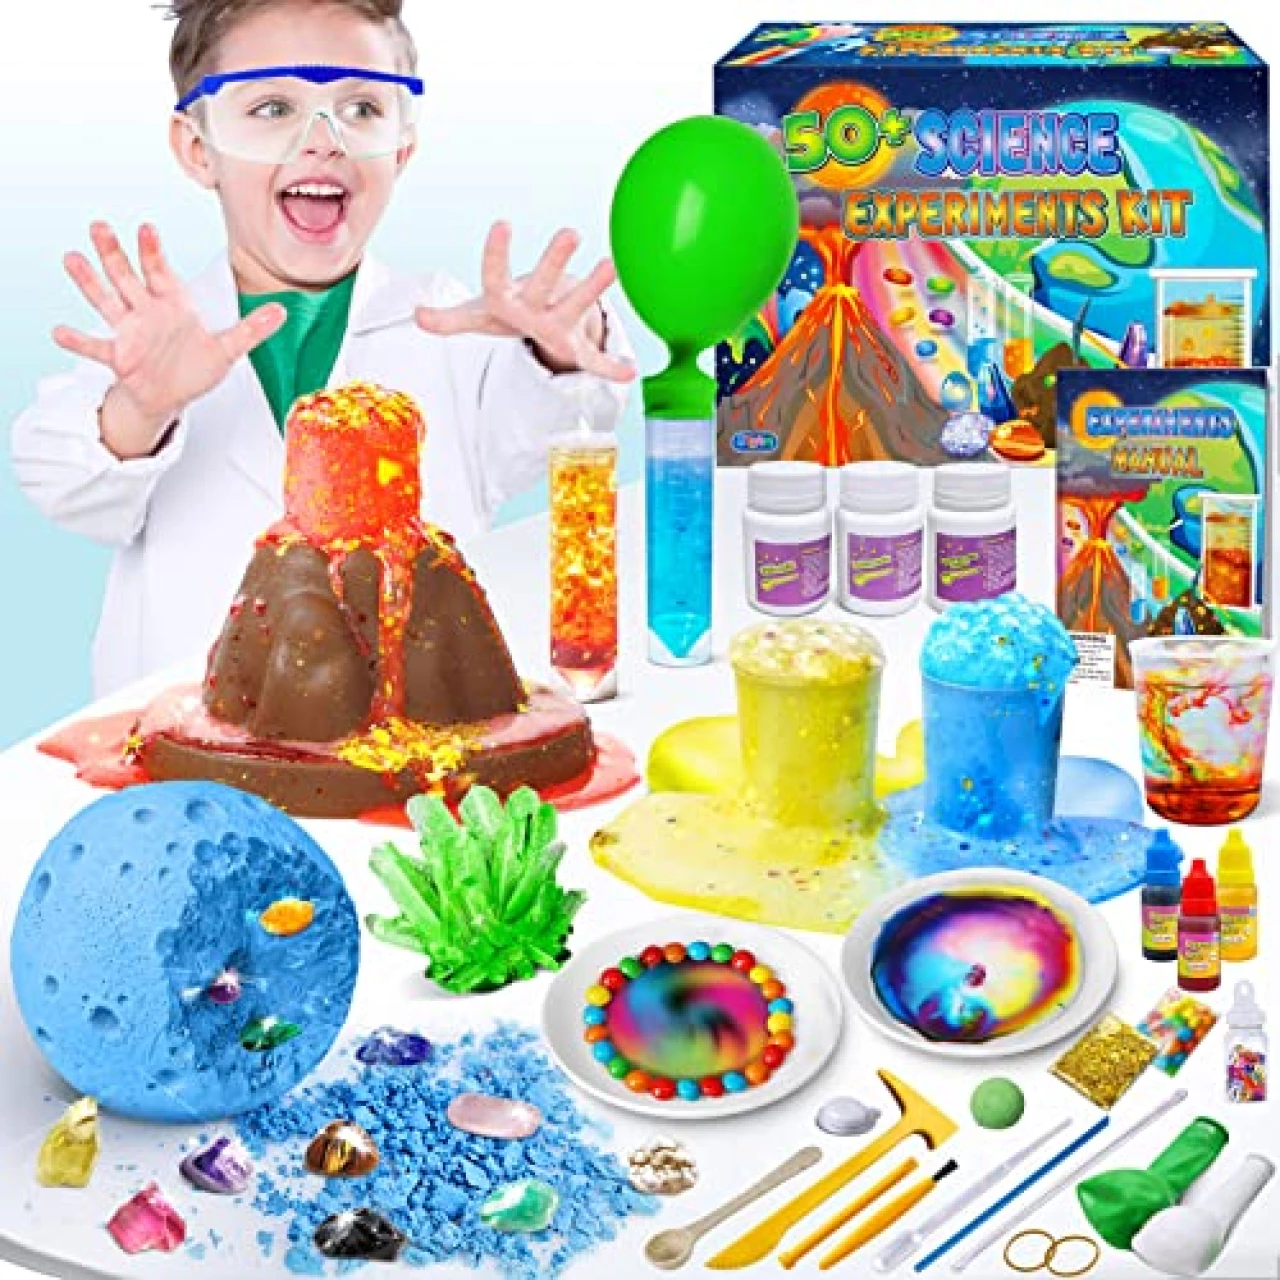 UNGLINGA 50+ Science Lab Experiments Kit for Kids Age 4-6-8-12, STEM Activities Educational Scientist Toys Gifts for Boys Girls Chemistry Set, Gemstone Dig, Volcano Eruption, Crystal Growing